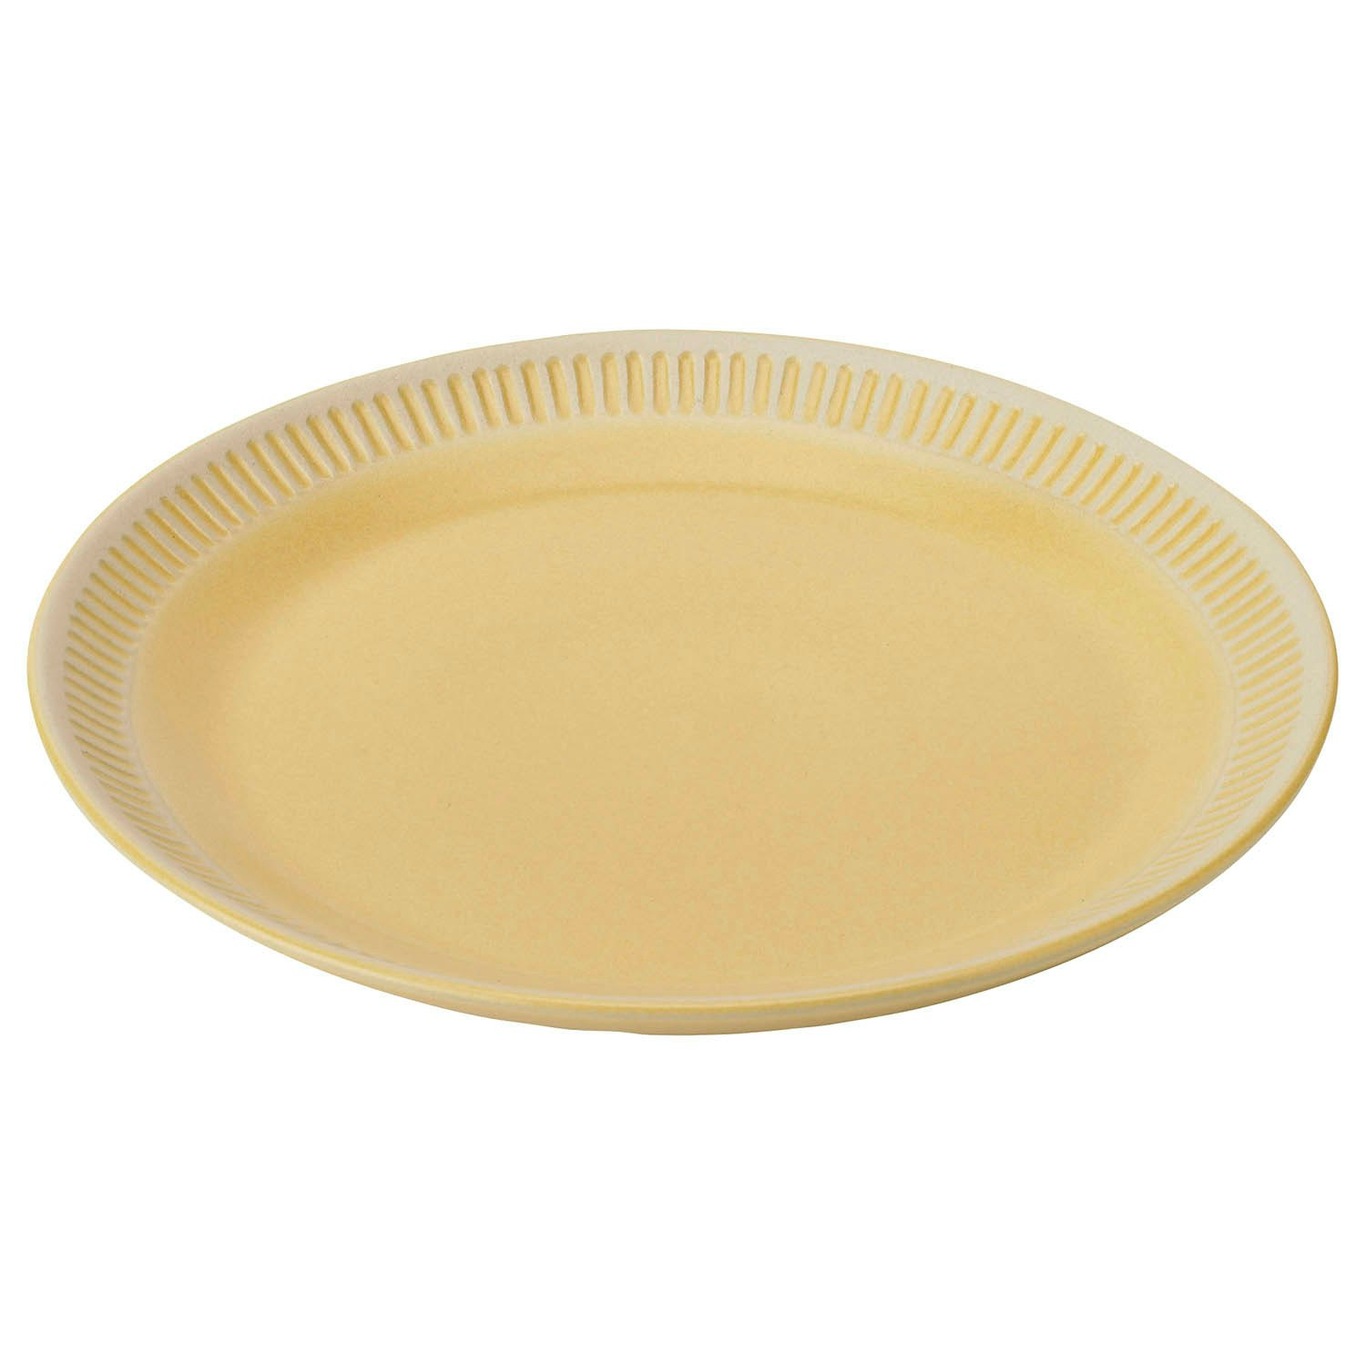 Colorit Plate 27 cm, Yellow